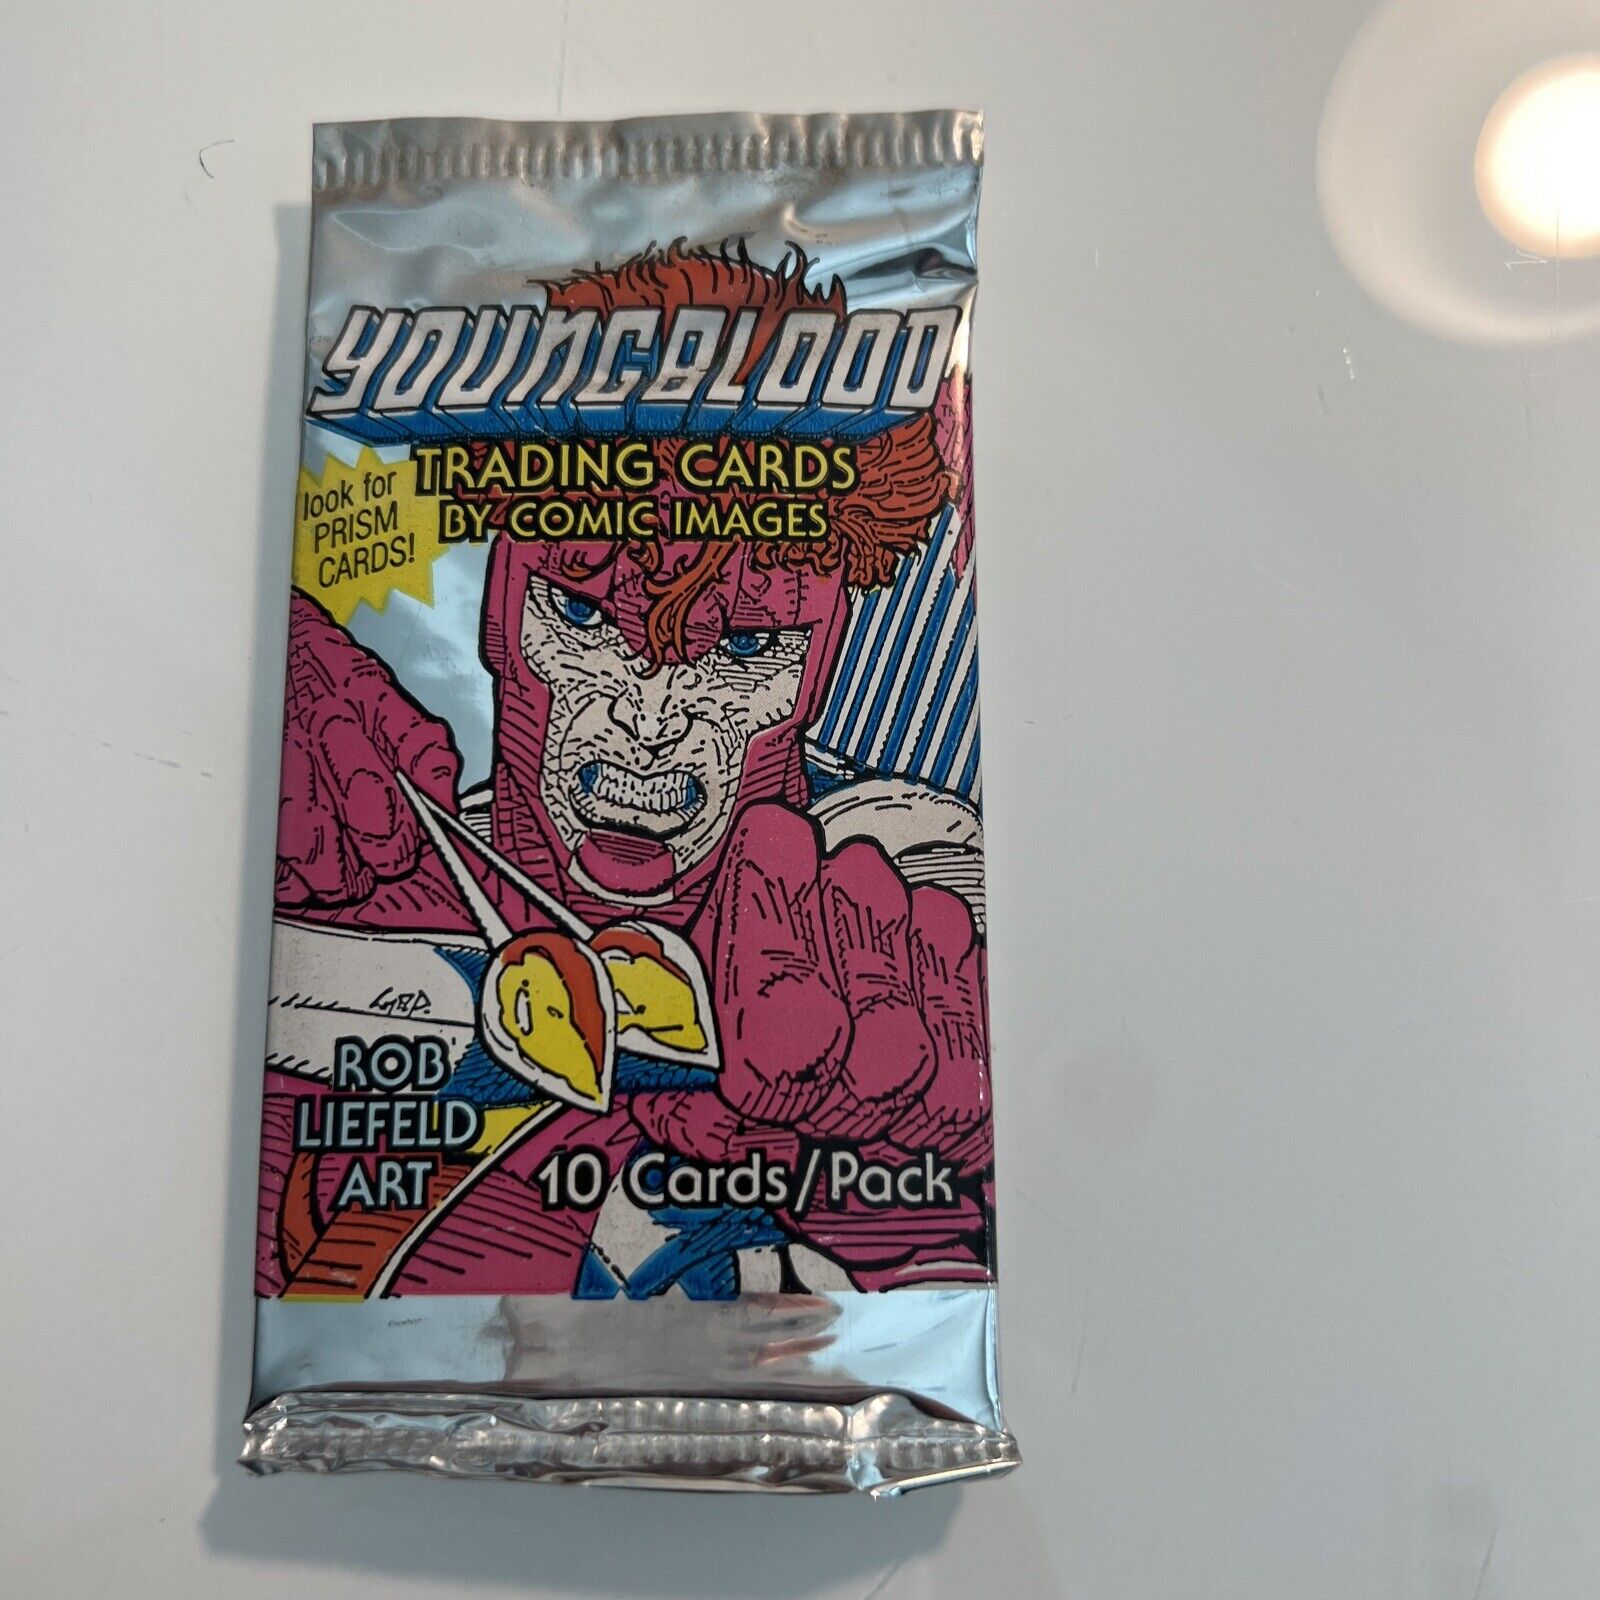 1992 Comic Images Youngblood Trading Cards Pack Factory Sealed Look for PRIZMS🔥